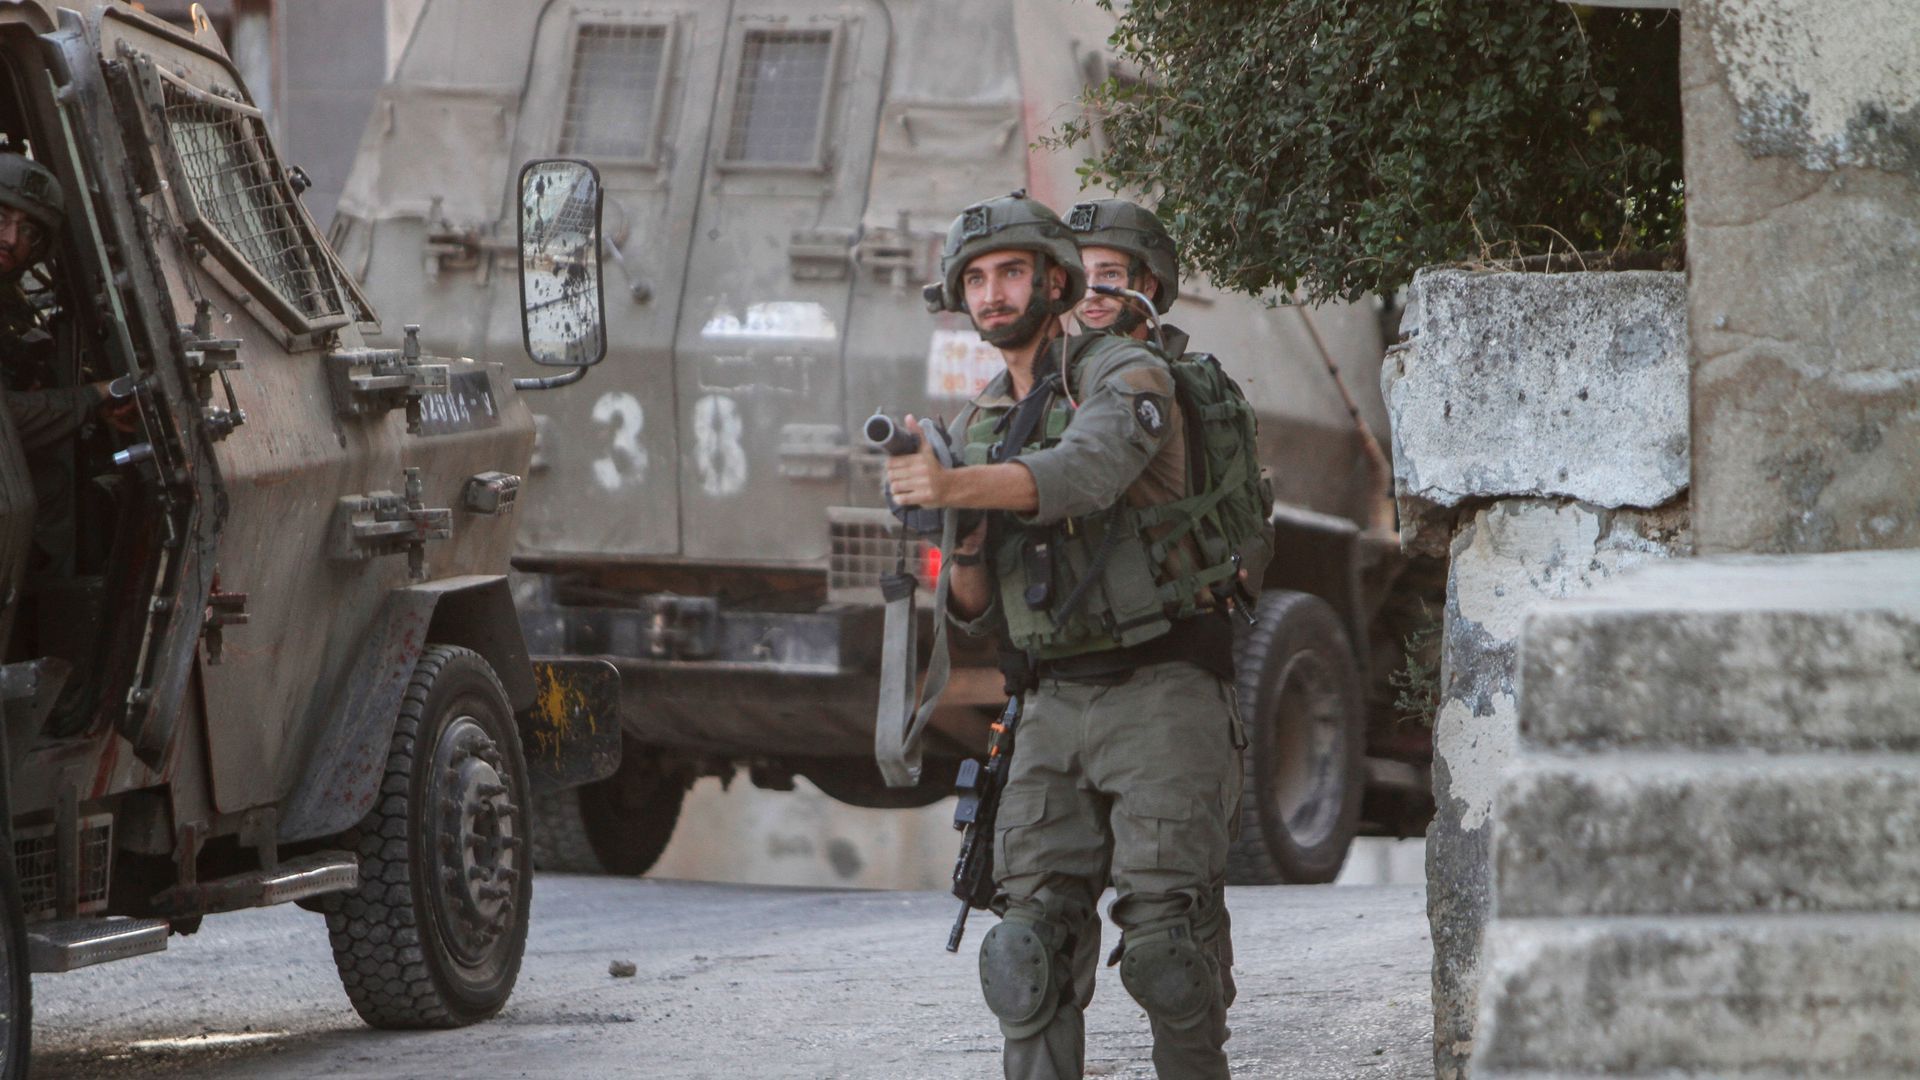 Israeli soldiers in the village of Rumaneh near the occupied West Bank city of Jenin on Aug. 2. Photo: Nasser Ishtayeh/SOPA Images/LightRocket via Getty Images